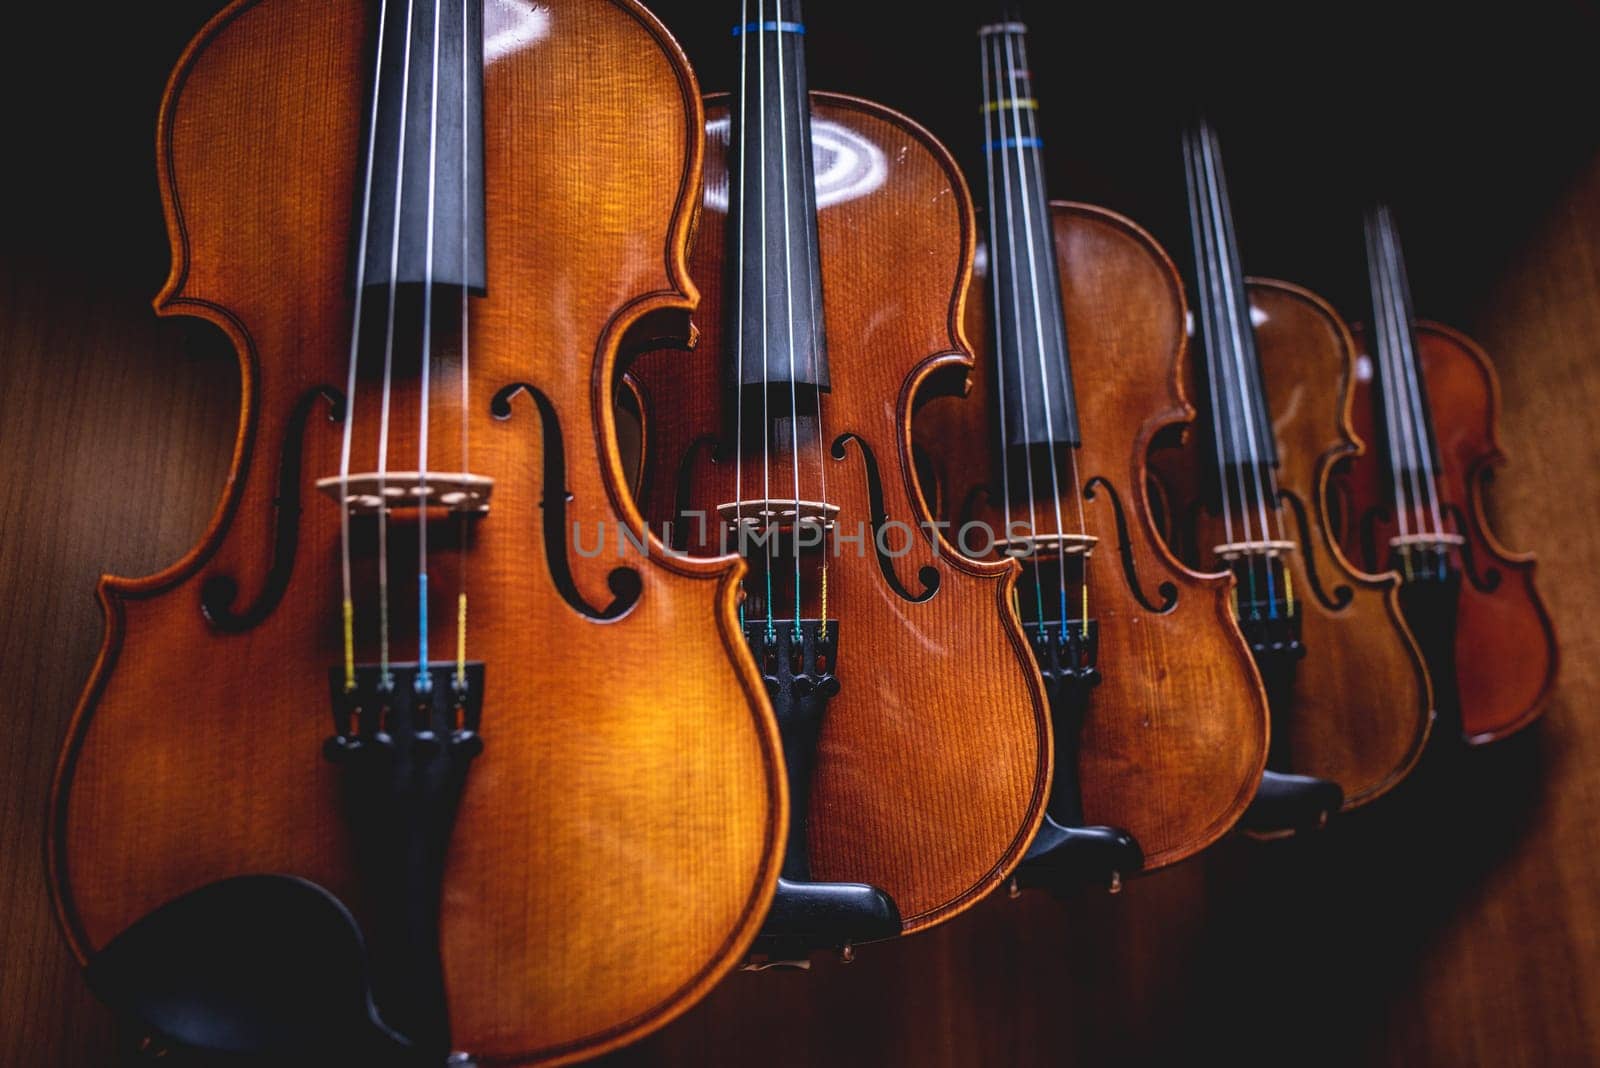 Row of multiple violins hanging on the wall